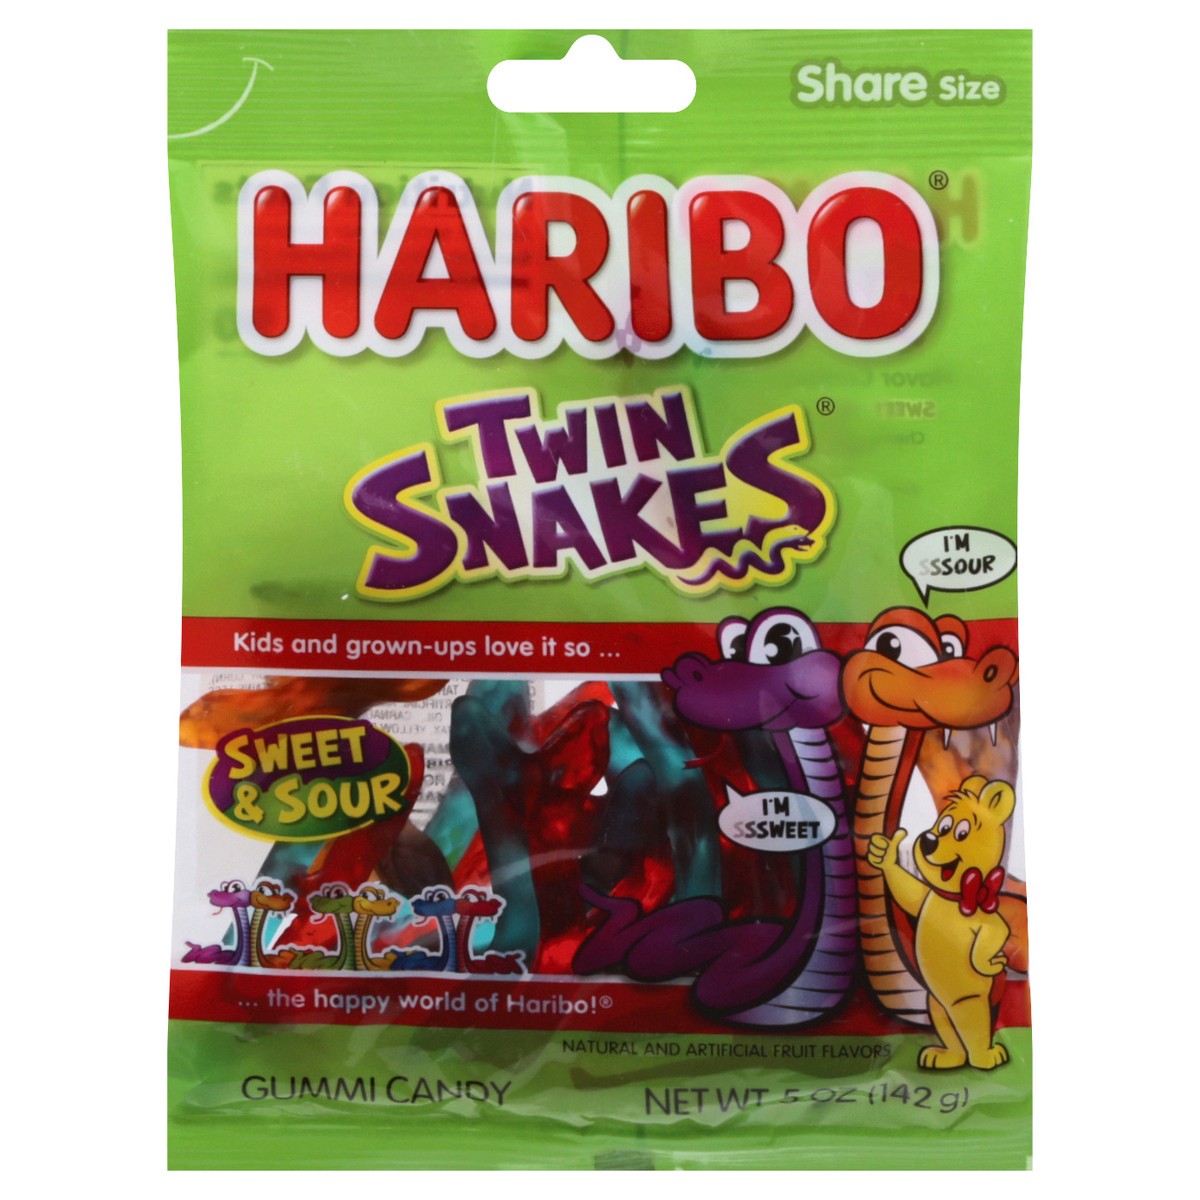 slide 1 of 9, Haribo Twin Snakes Share Size Gummi Candy 5 oz, 5 oz